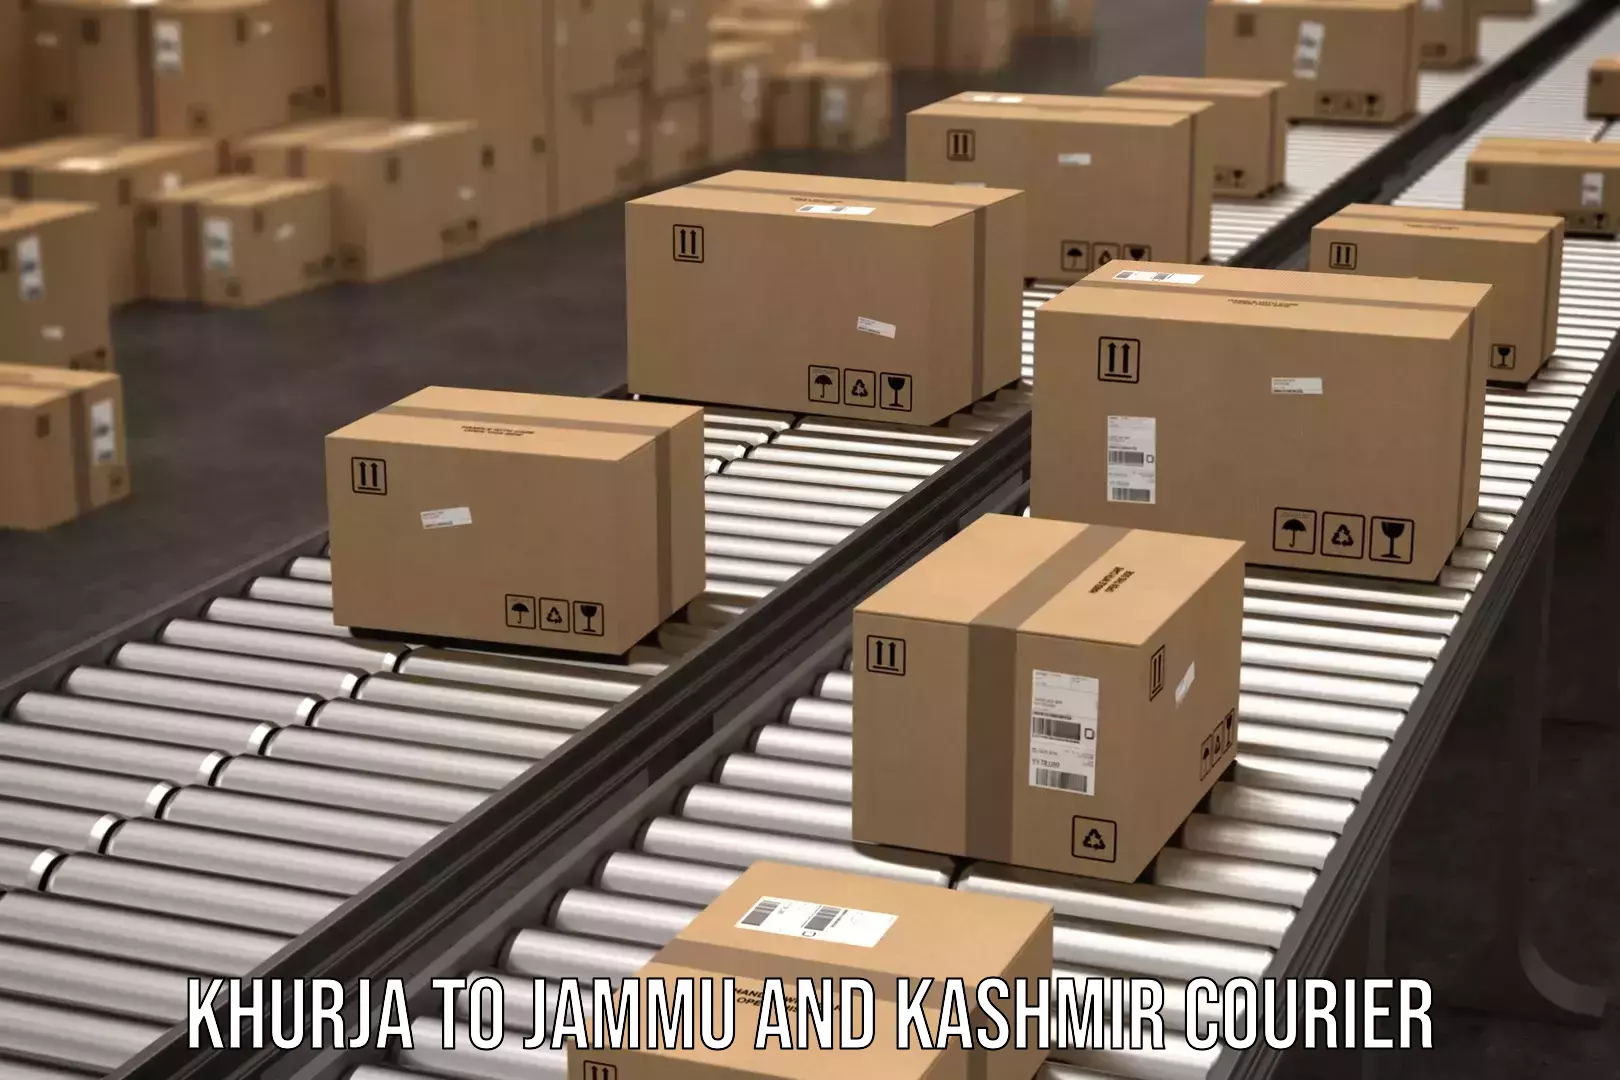 State-of-the-art courier technology Khurja to Jakh